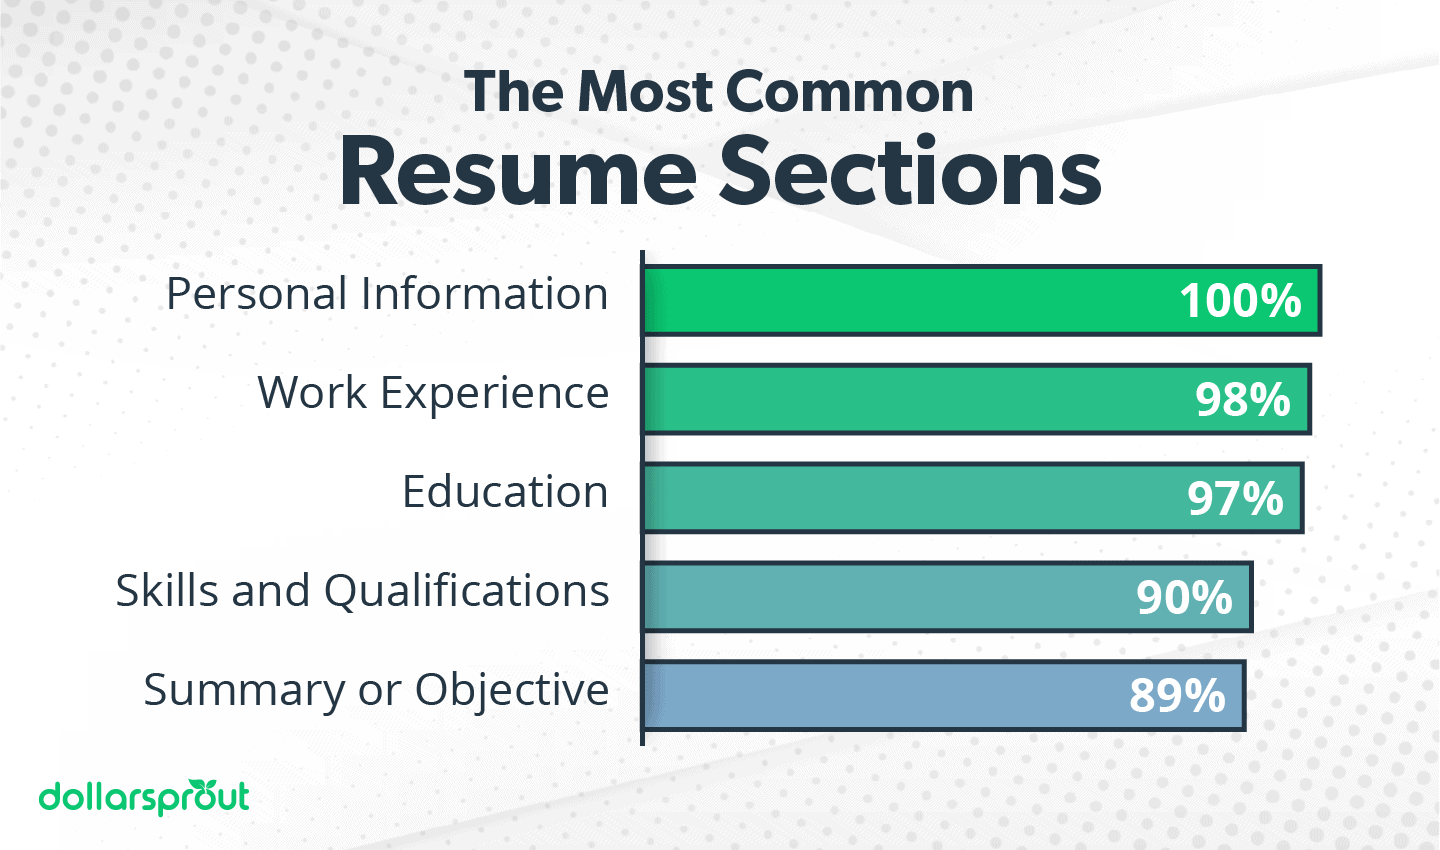 The Most Common Resume Sections